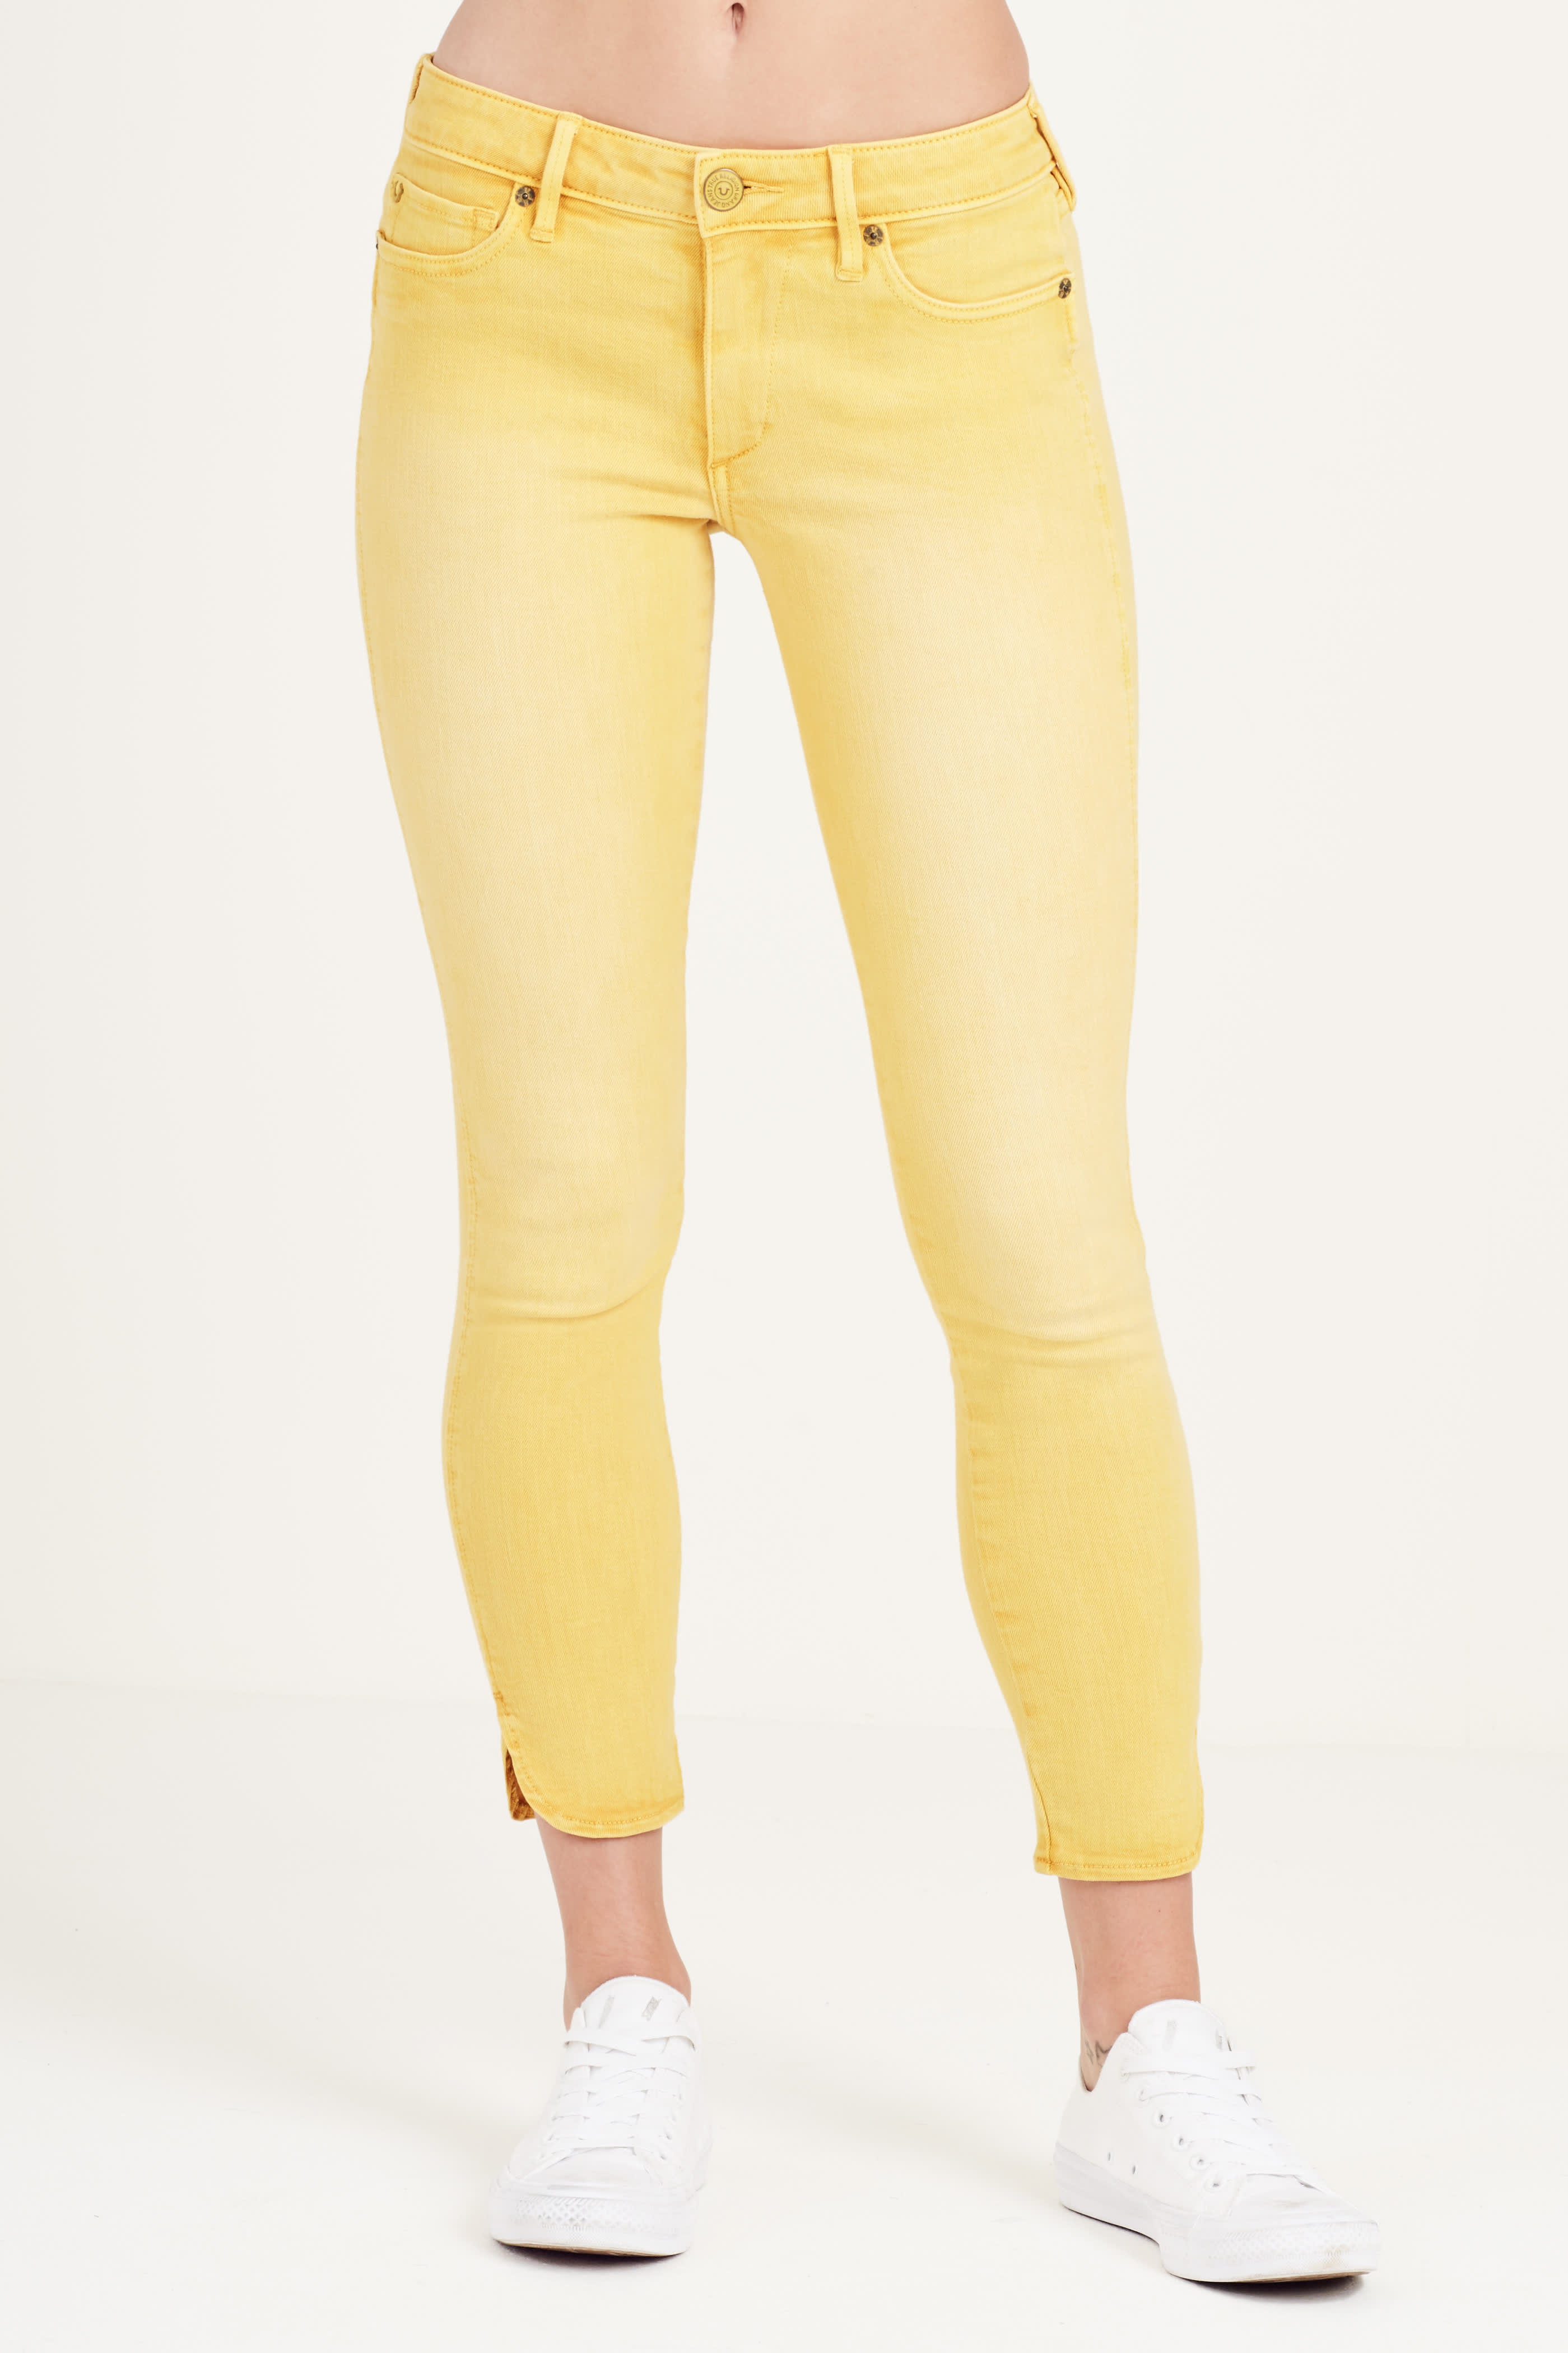 HALLE SUPER SKINNY CROPPED WOMENS JEAN